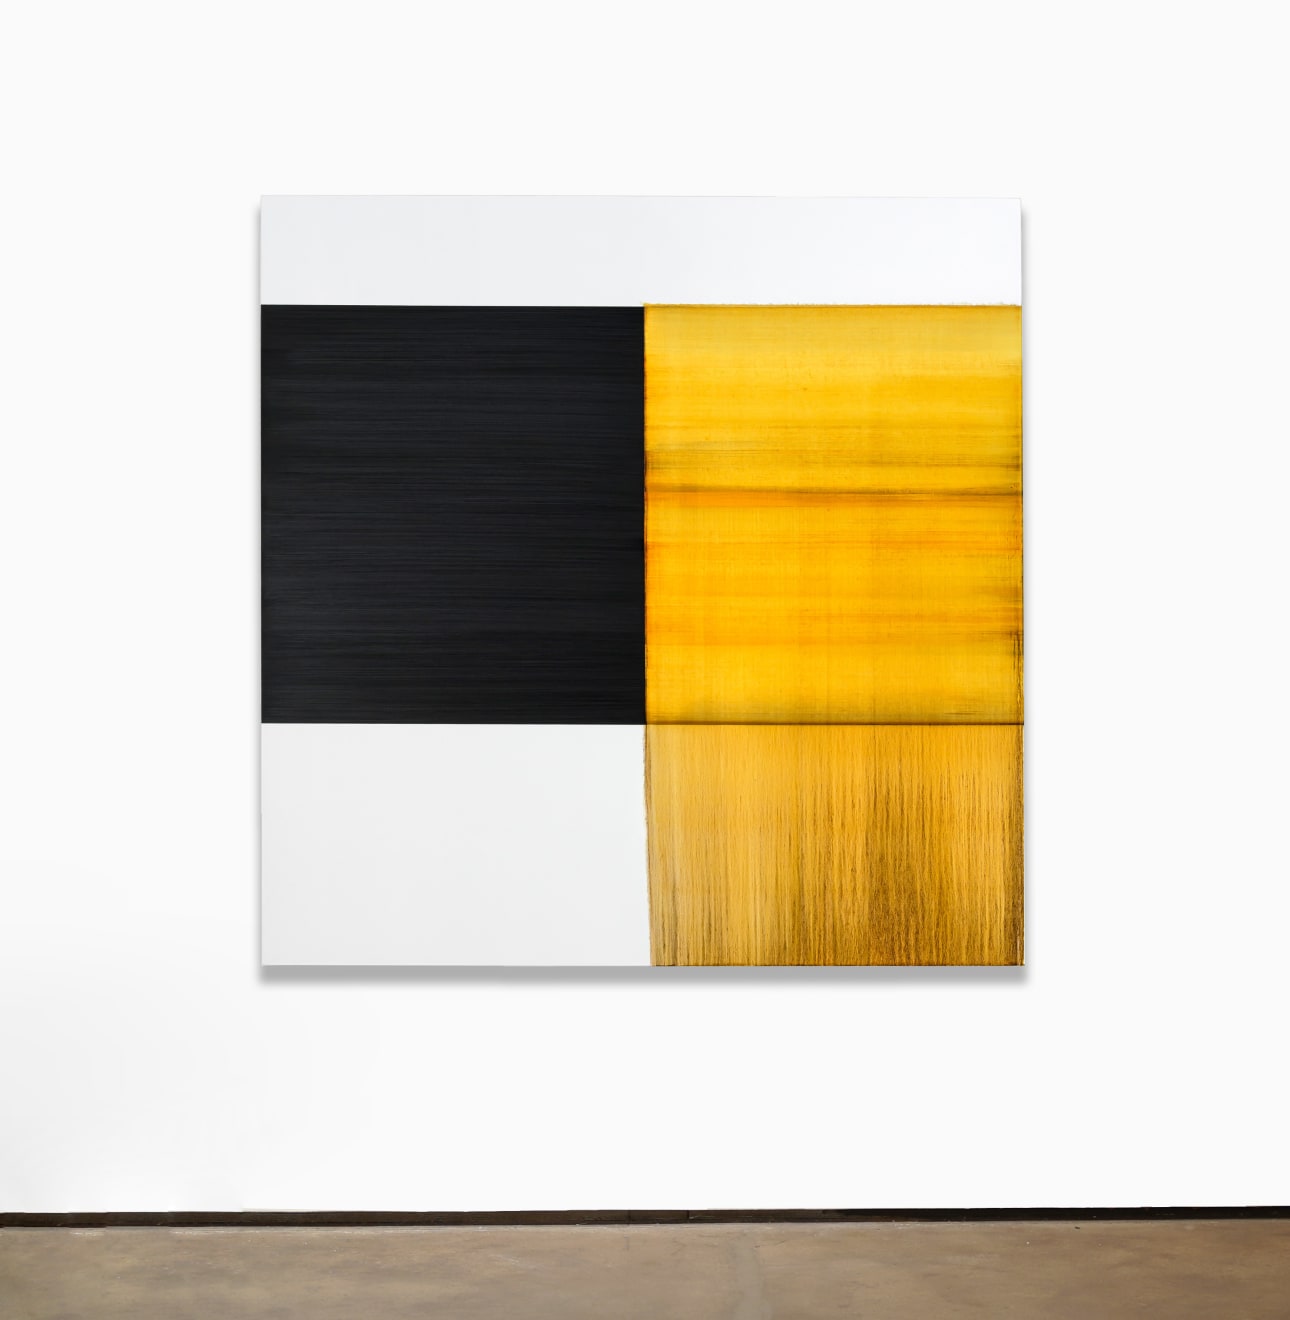 Callum Innes Exposed Painting Quinacridone Gold, 2021 signed by the artist, verso with accompanying signed certificate of authenticity oil on linen 70 7/8 x 68 7/8 inches (180 x 175 cm)